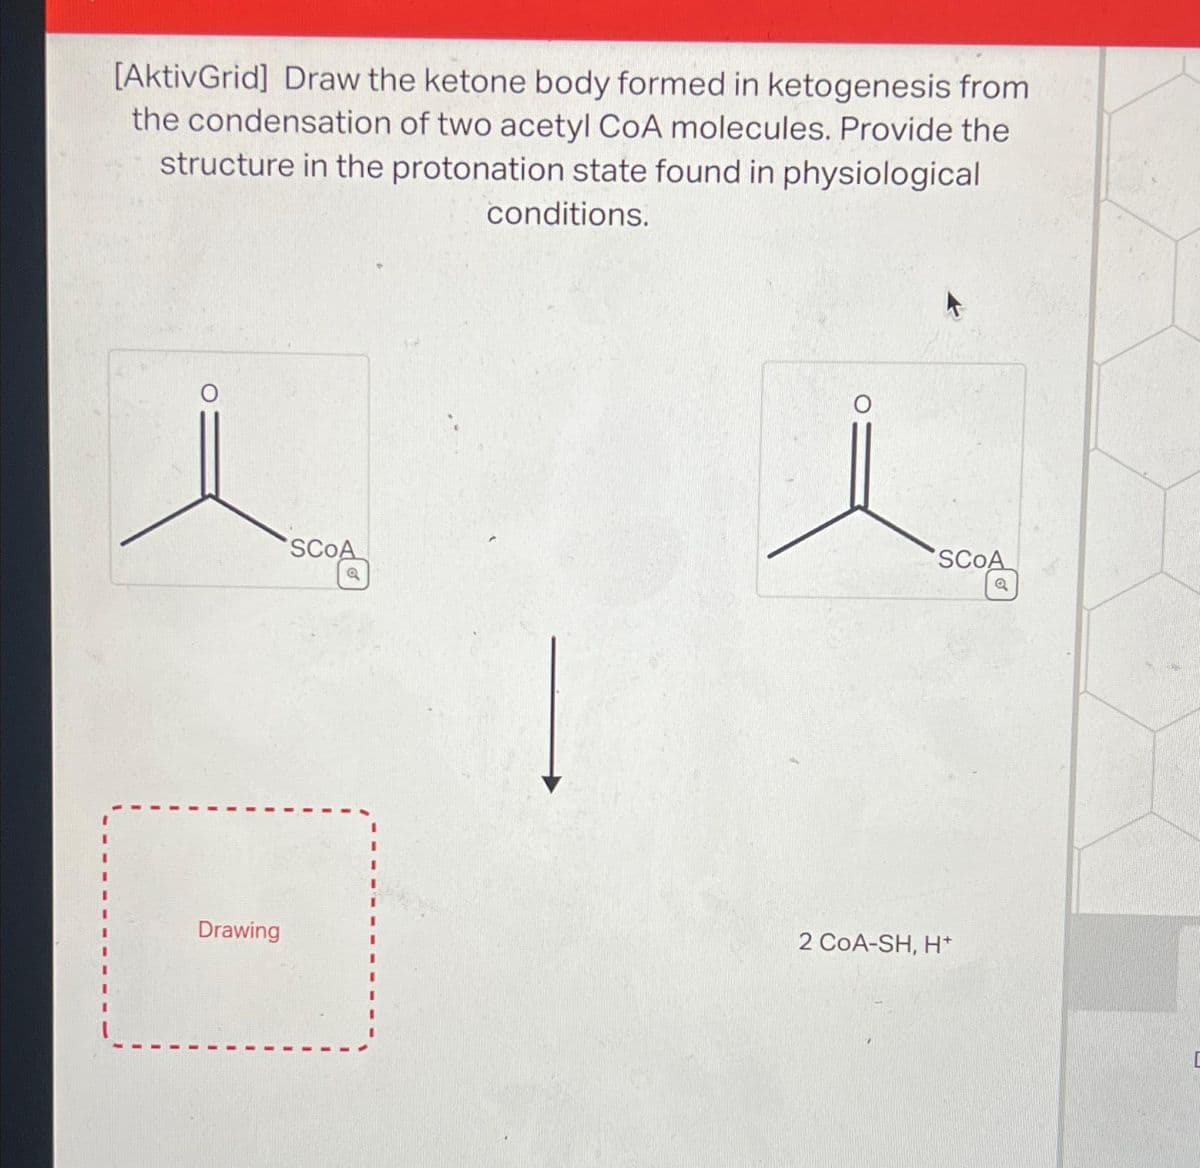 [AktivGrid] Draw the ketone body formed in ketogenesis from
the condensation of two acetyl CoA molecules. Provide the
structure in the protonation state found in physiological
conditions.
Drawing
SCOA
SCOA
2 COA-SH, H*